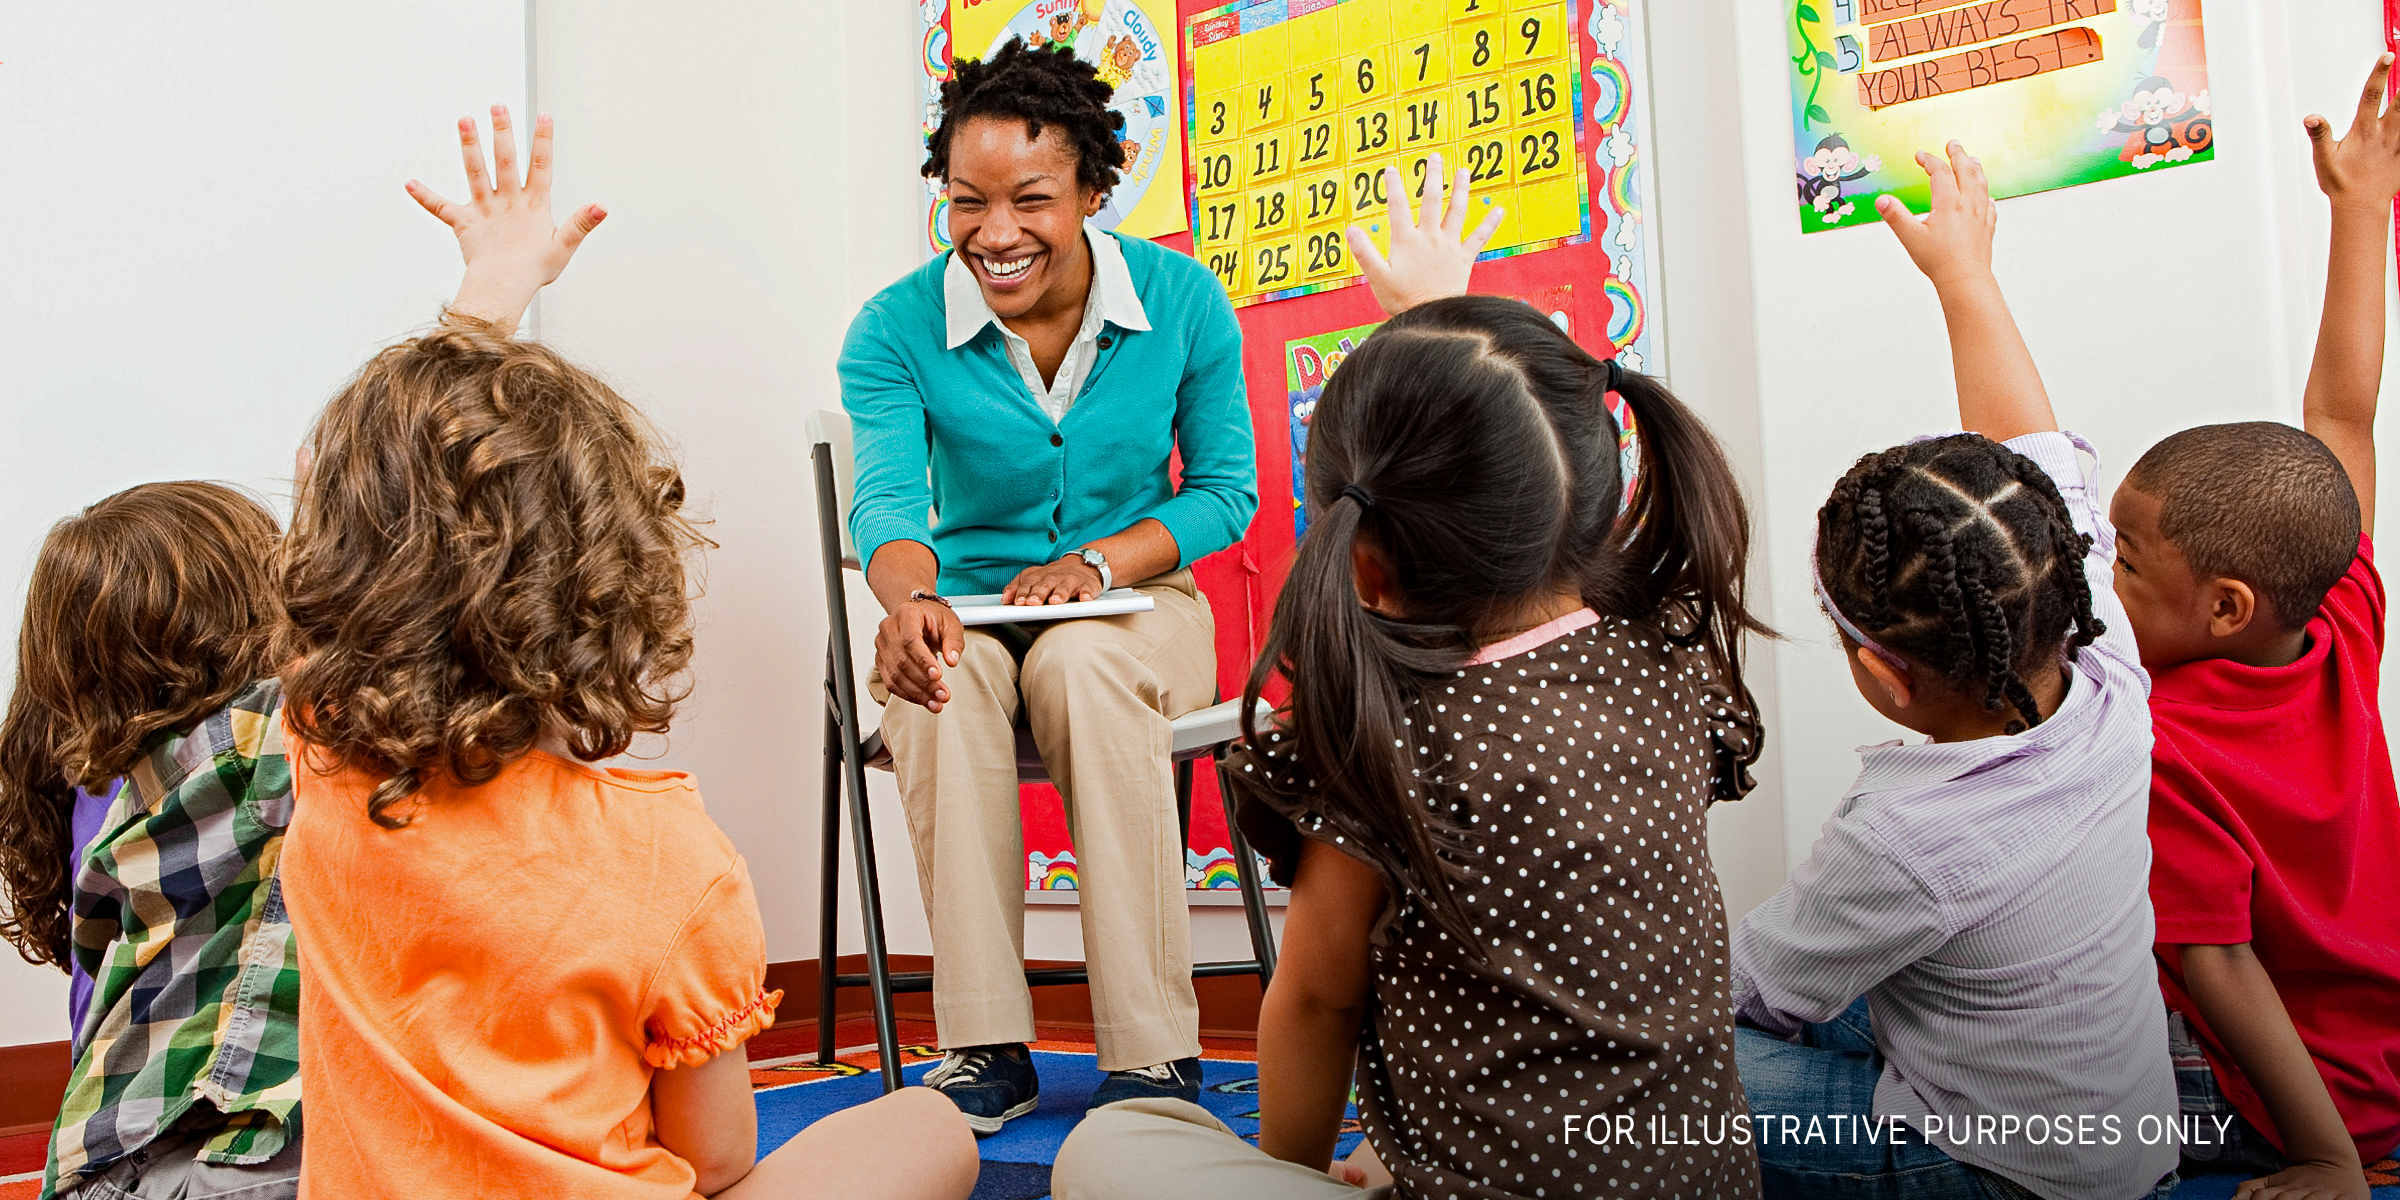 A teacher smiling at her students | Source: Shutterstock